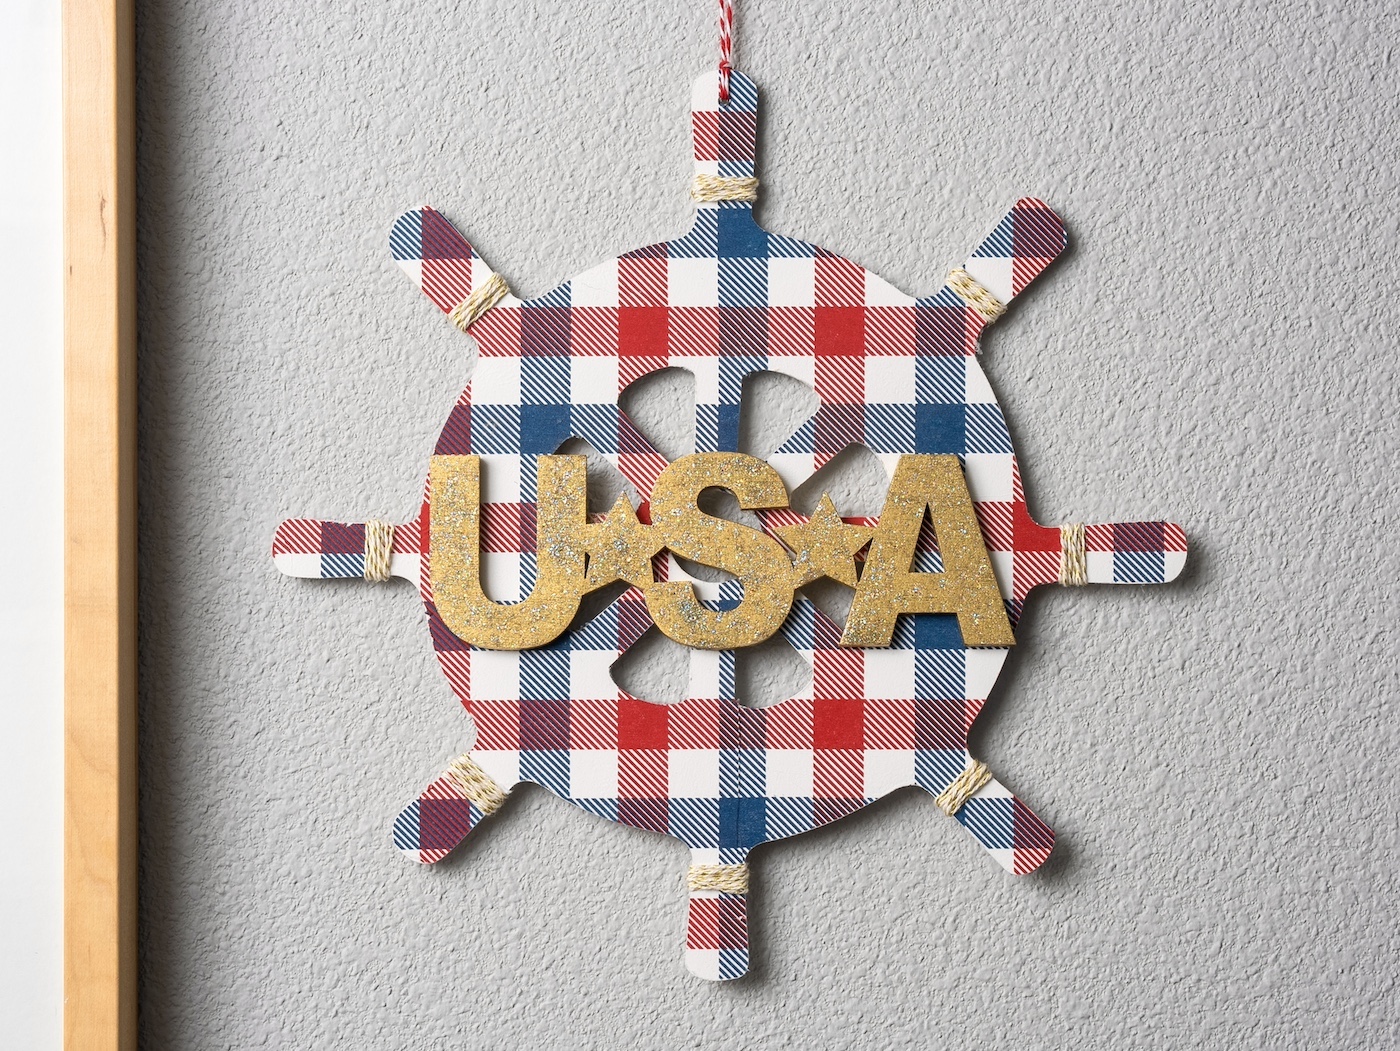 DIY 4th of July Wall Decor on a Budget